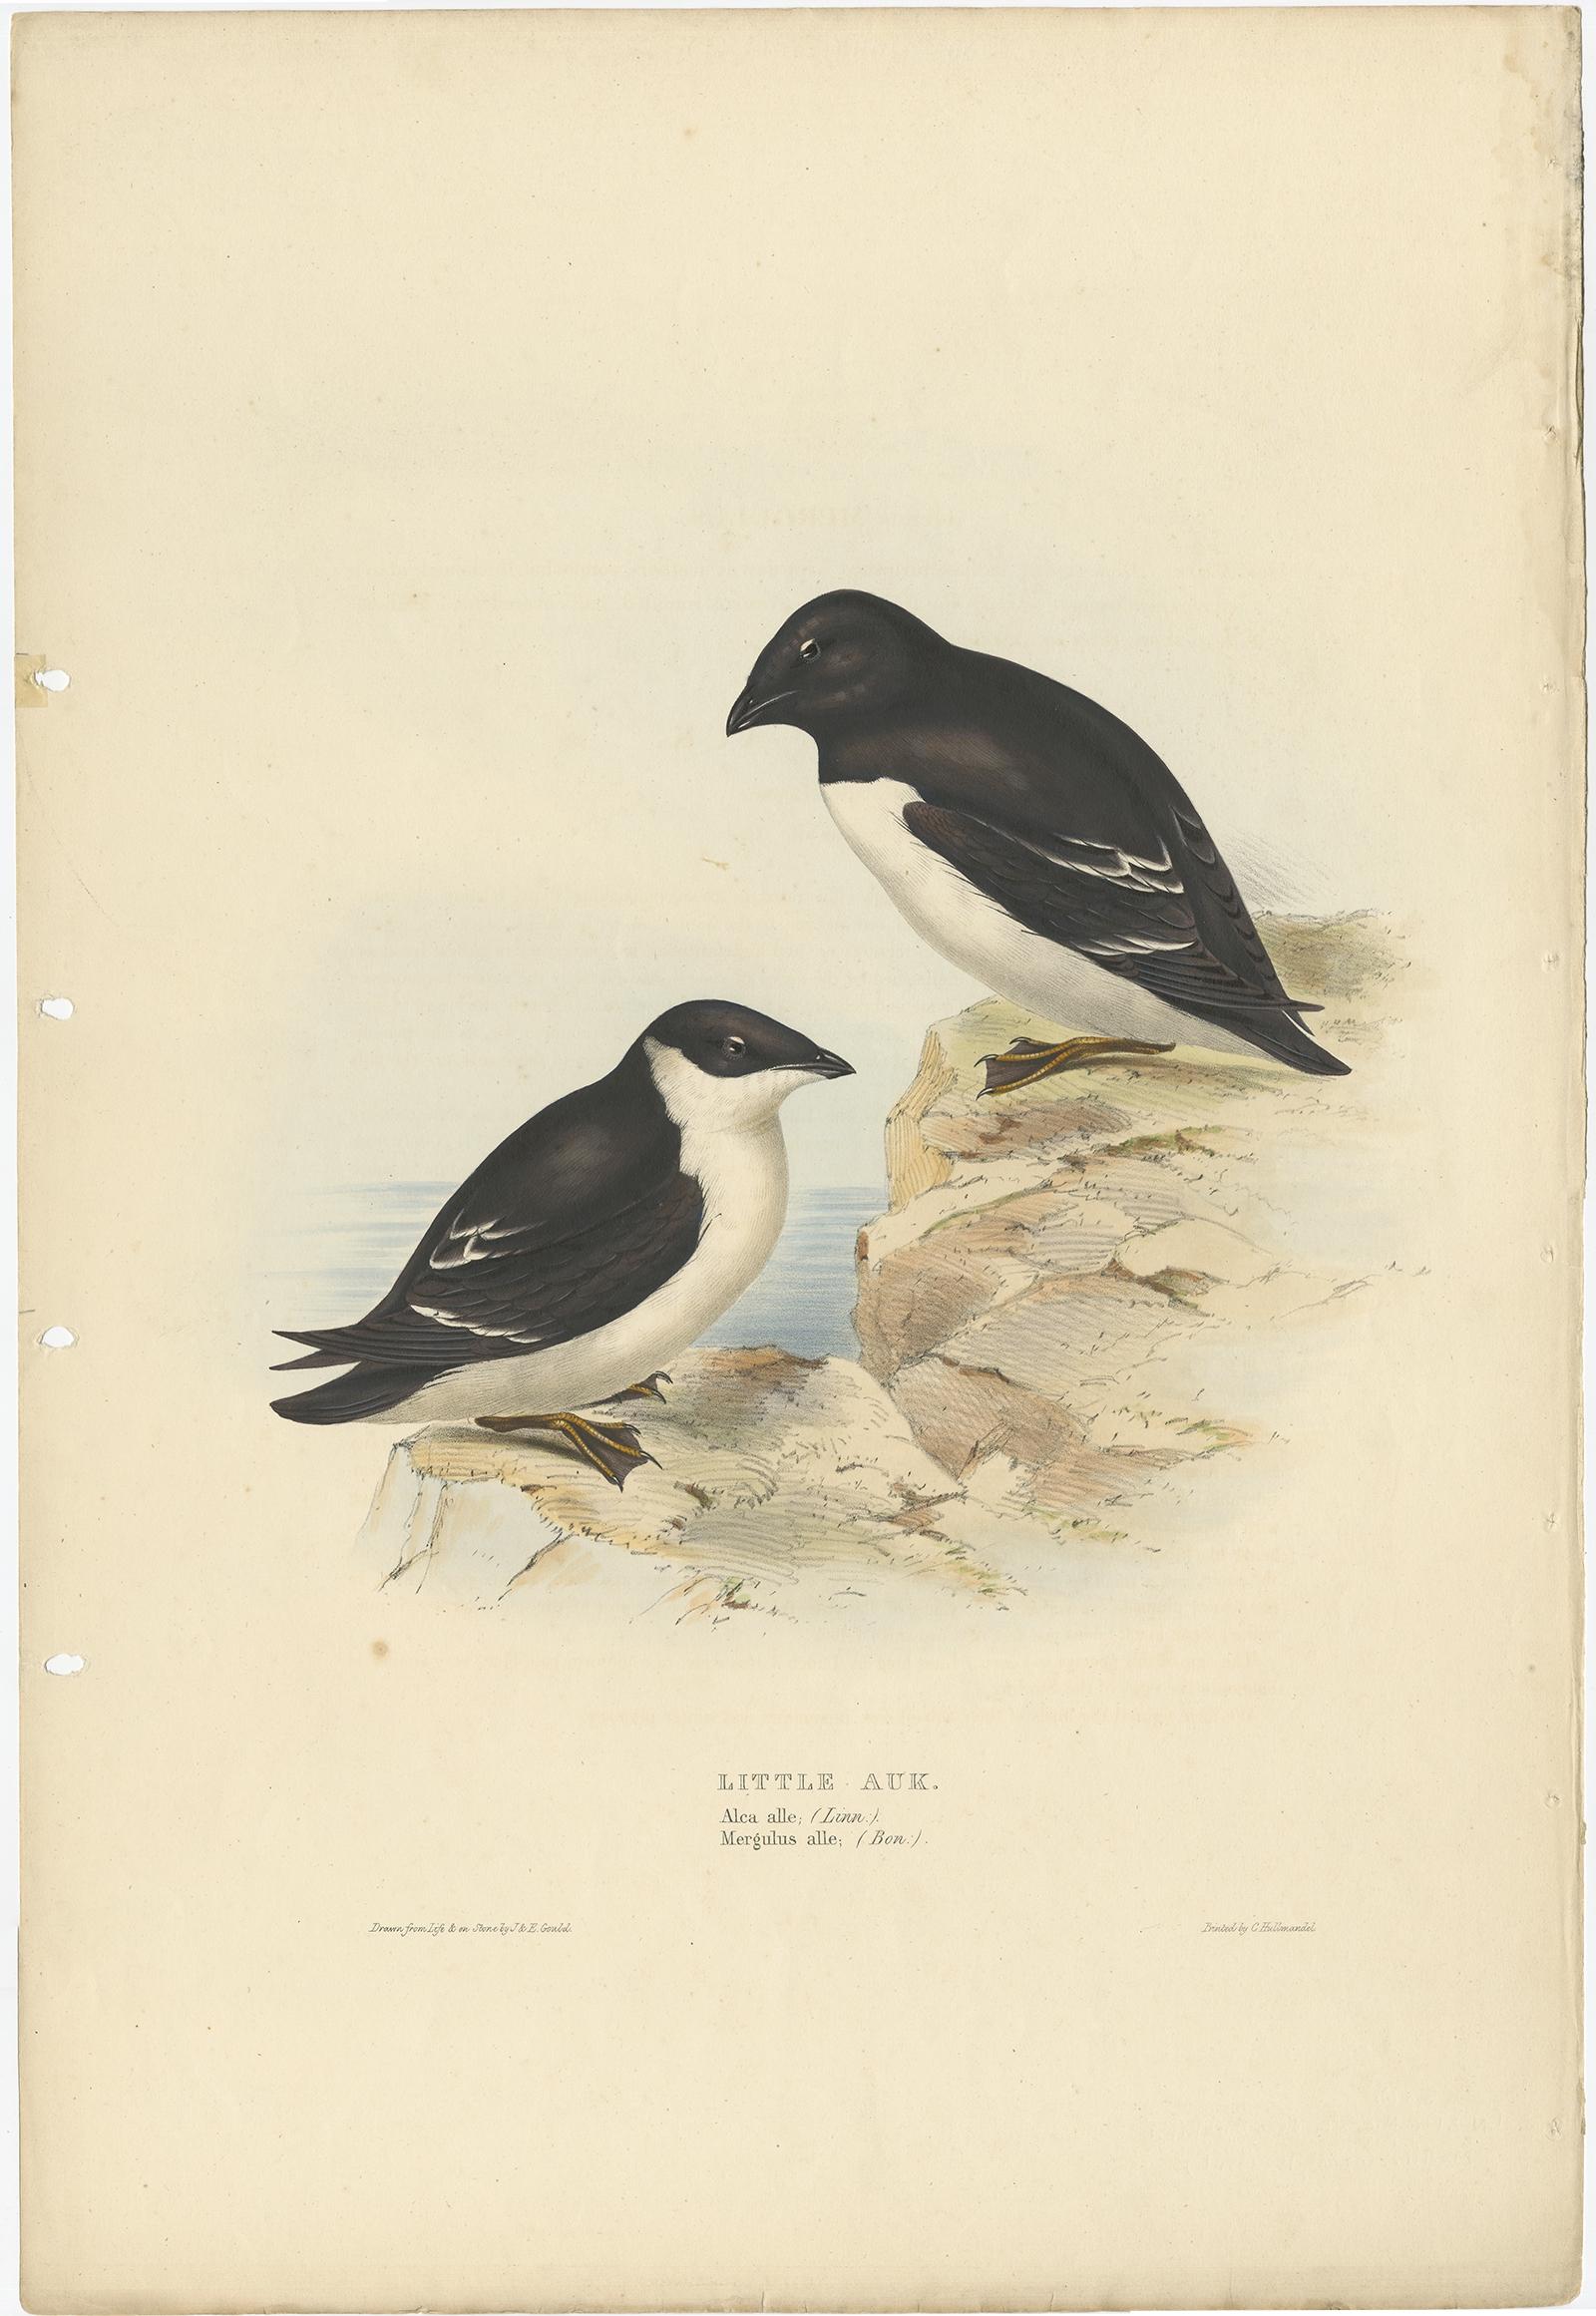 Antique bird print titled 'Little Auk'. 

Old bird print depicting the Little Auk. This print originates from 'Birds of Europe' by J. Gould (1832-1837).

Artists and Engravers: John Gould (1804 - 1881) was an English ornithologist and bird